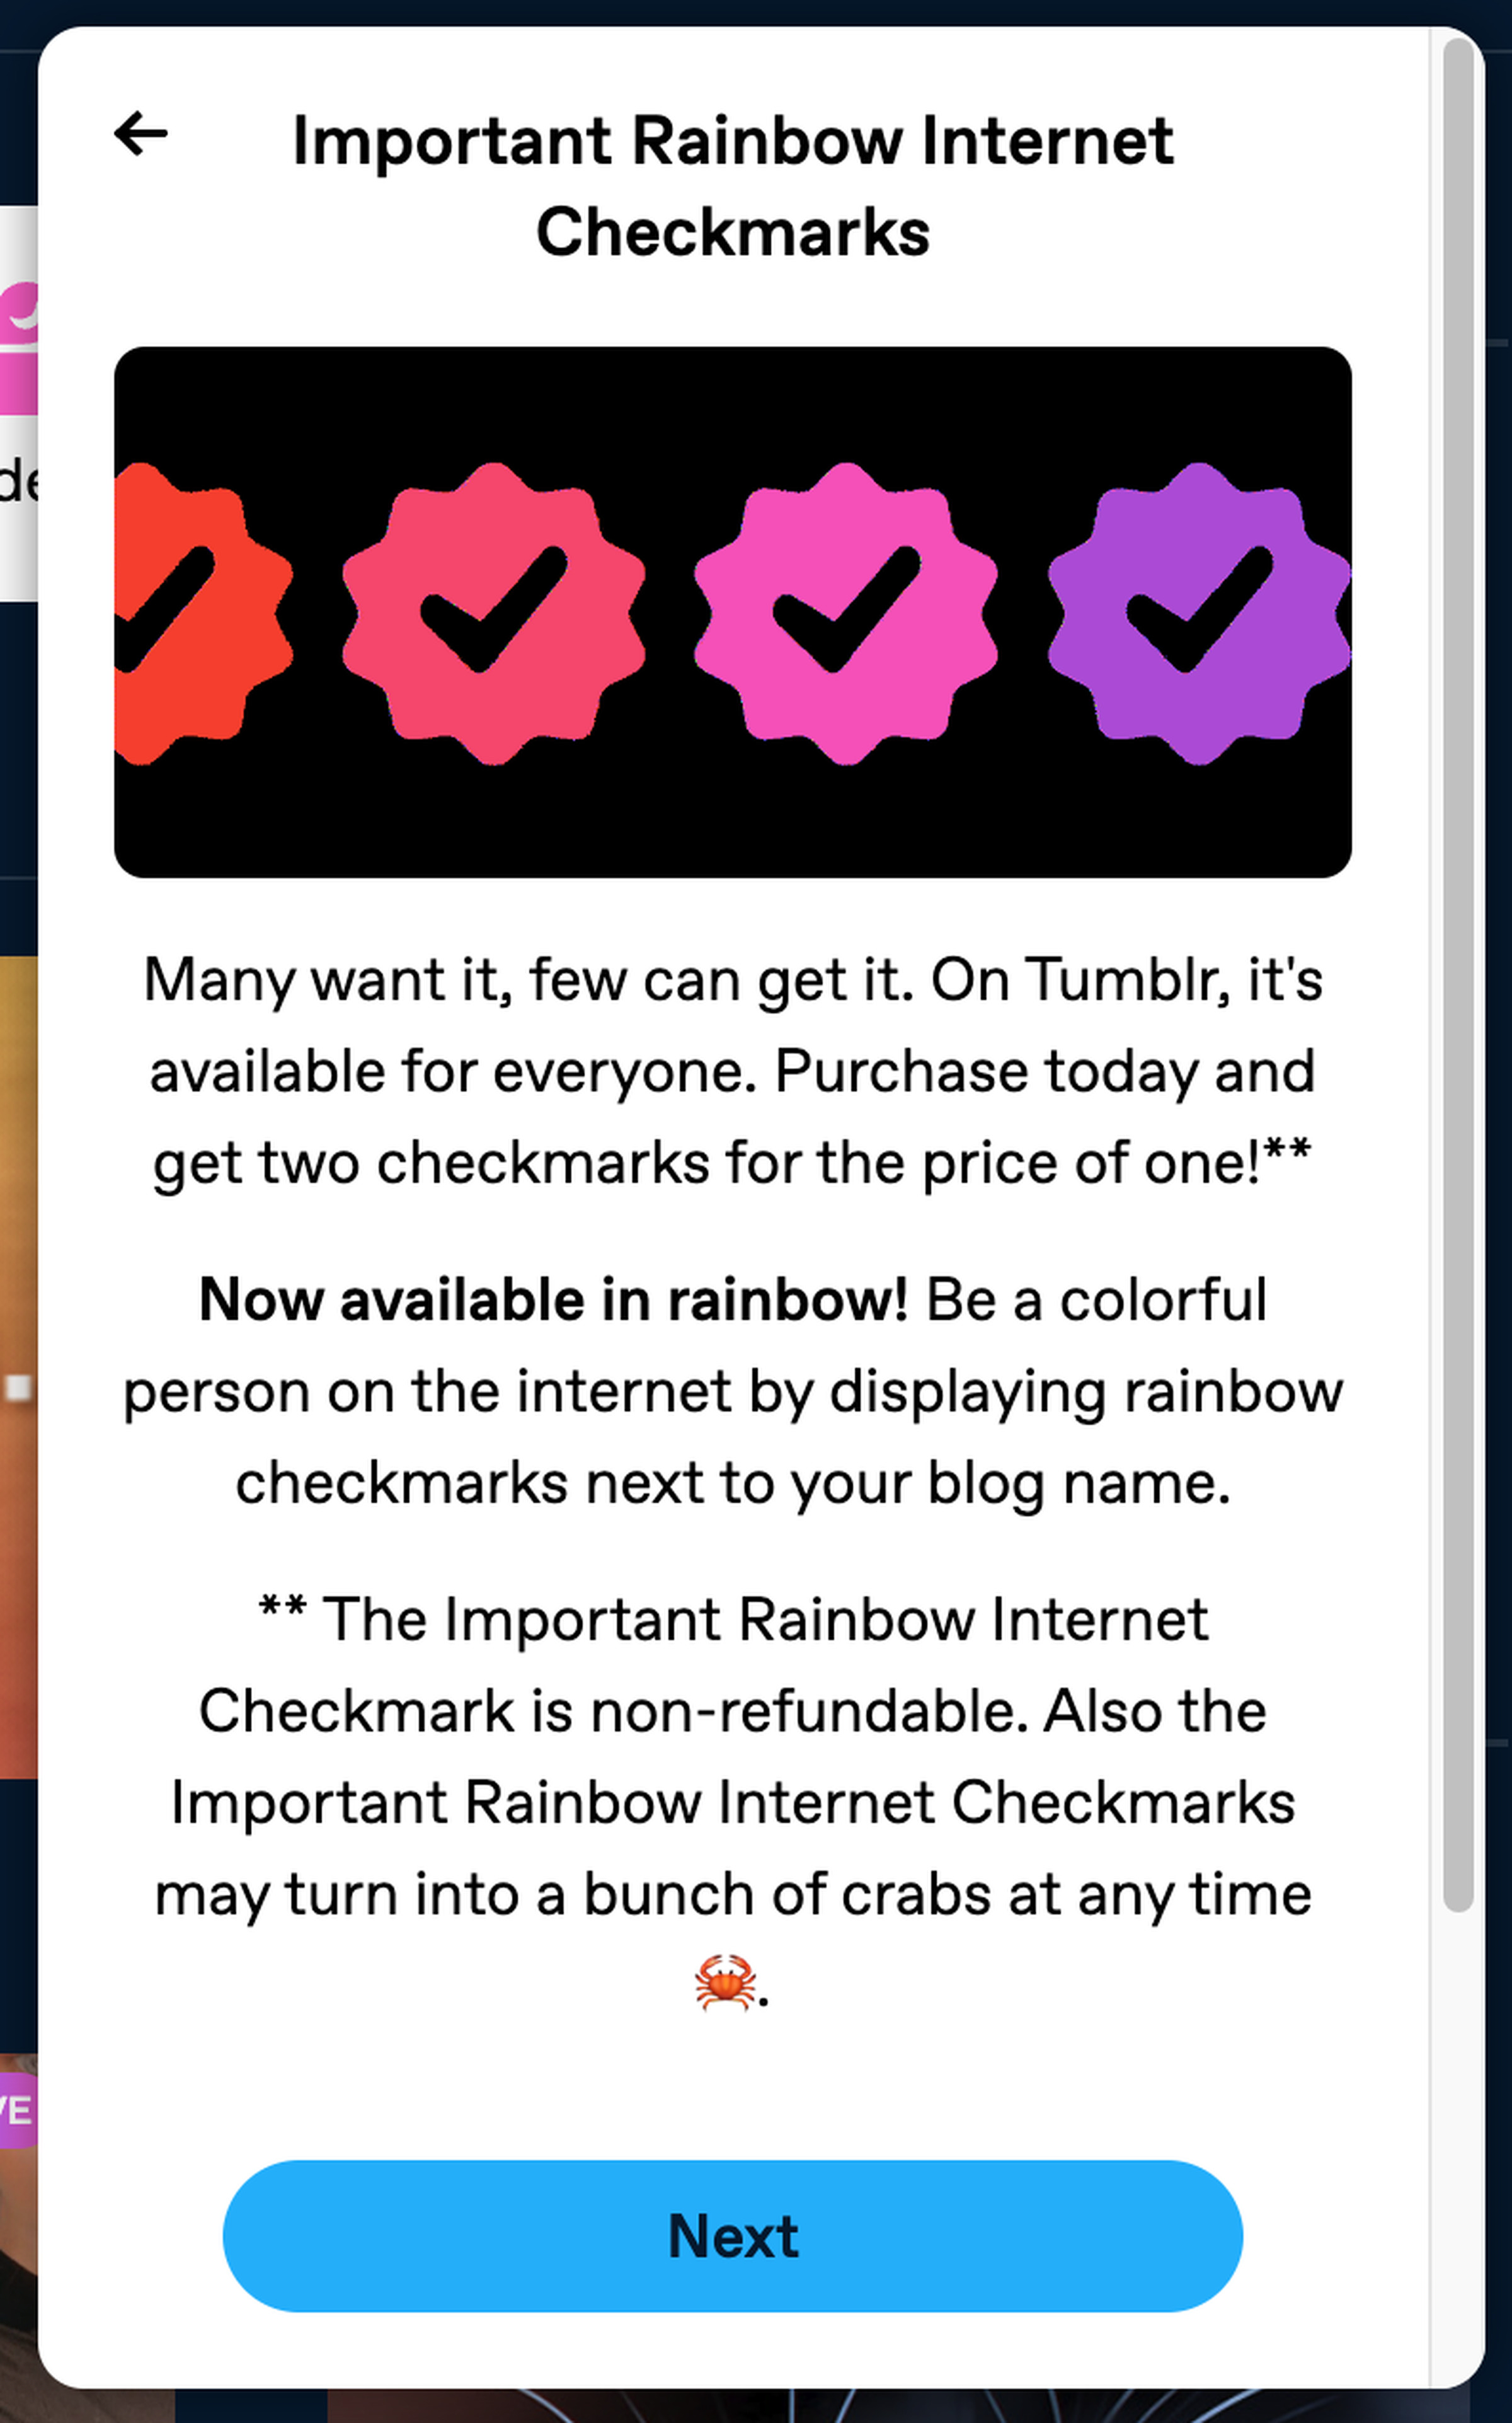 A picture of Tumblr’s ad for “Important Rainbow Internet Checkmarks”